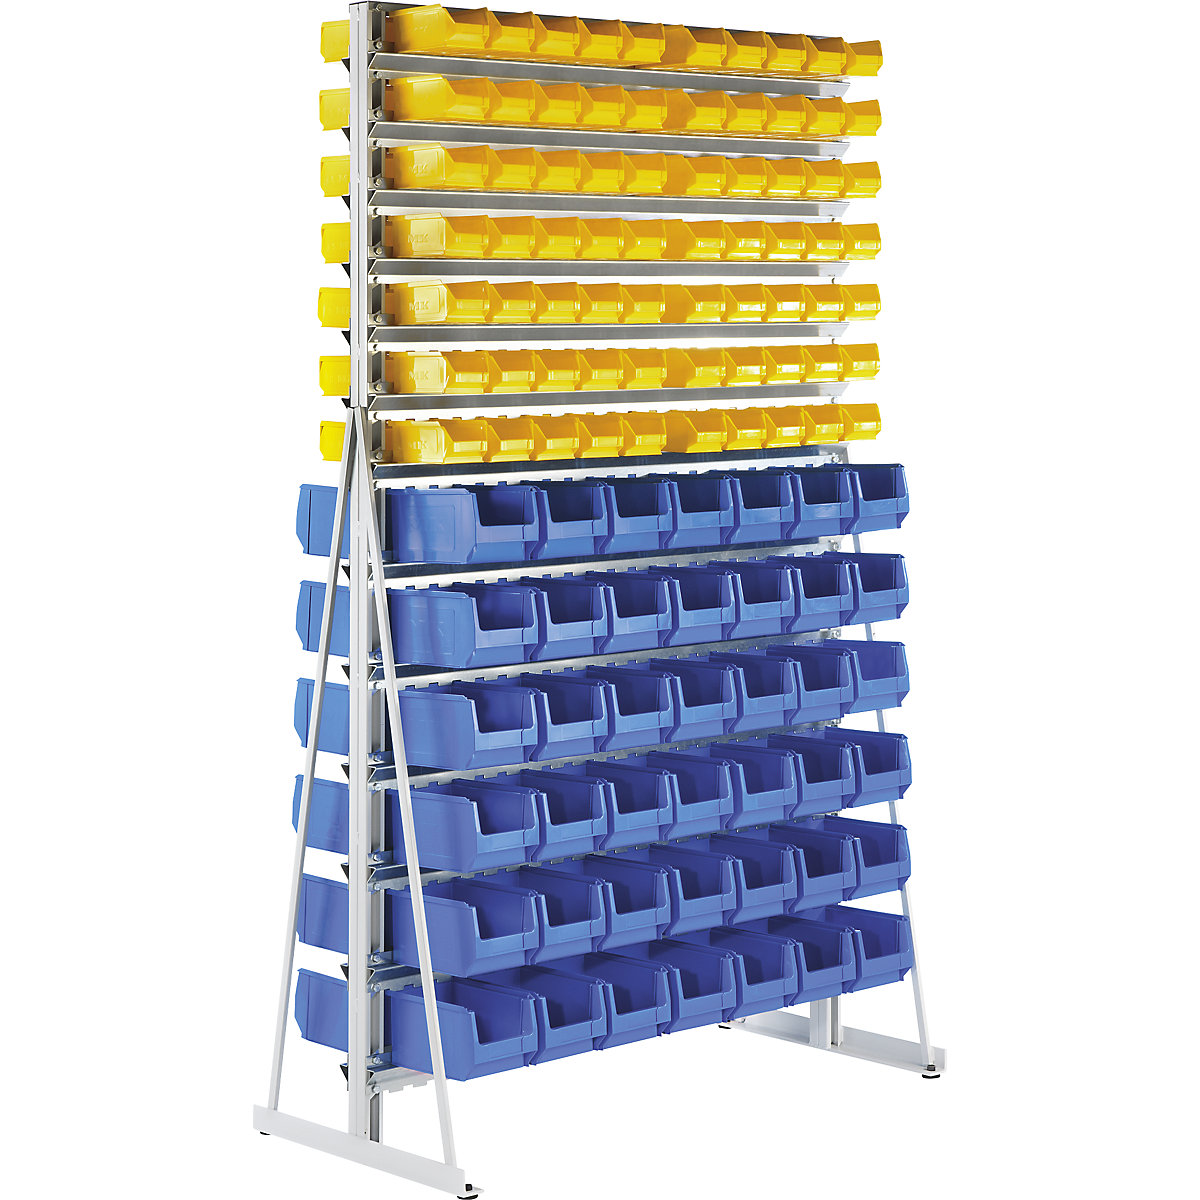 Free-standing small parts shelf unit with open fronted storage bins –  eurokraft pro: double sided